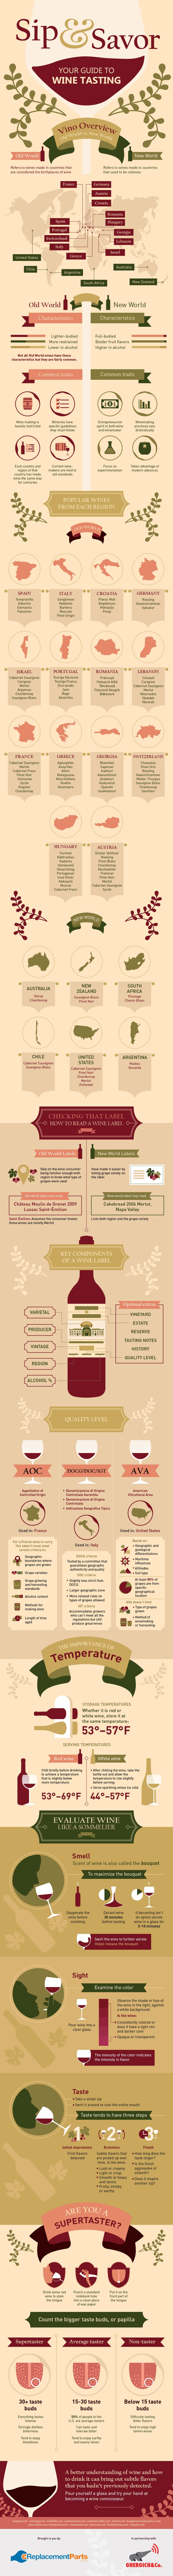 your-guide-wine-tasting